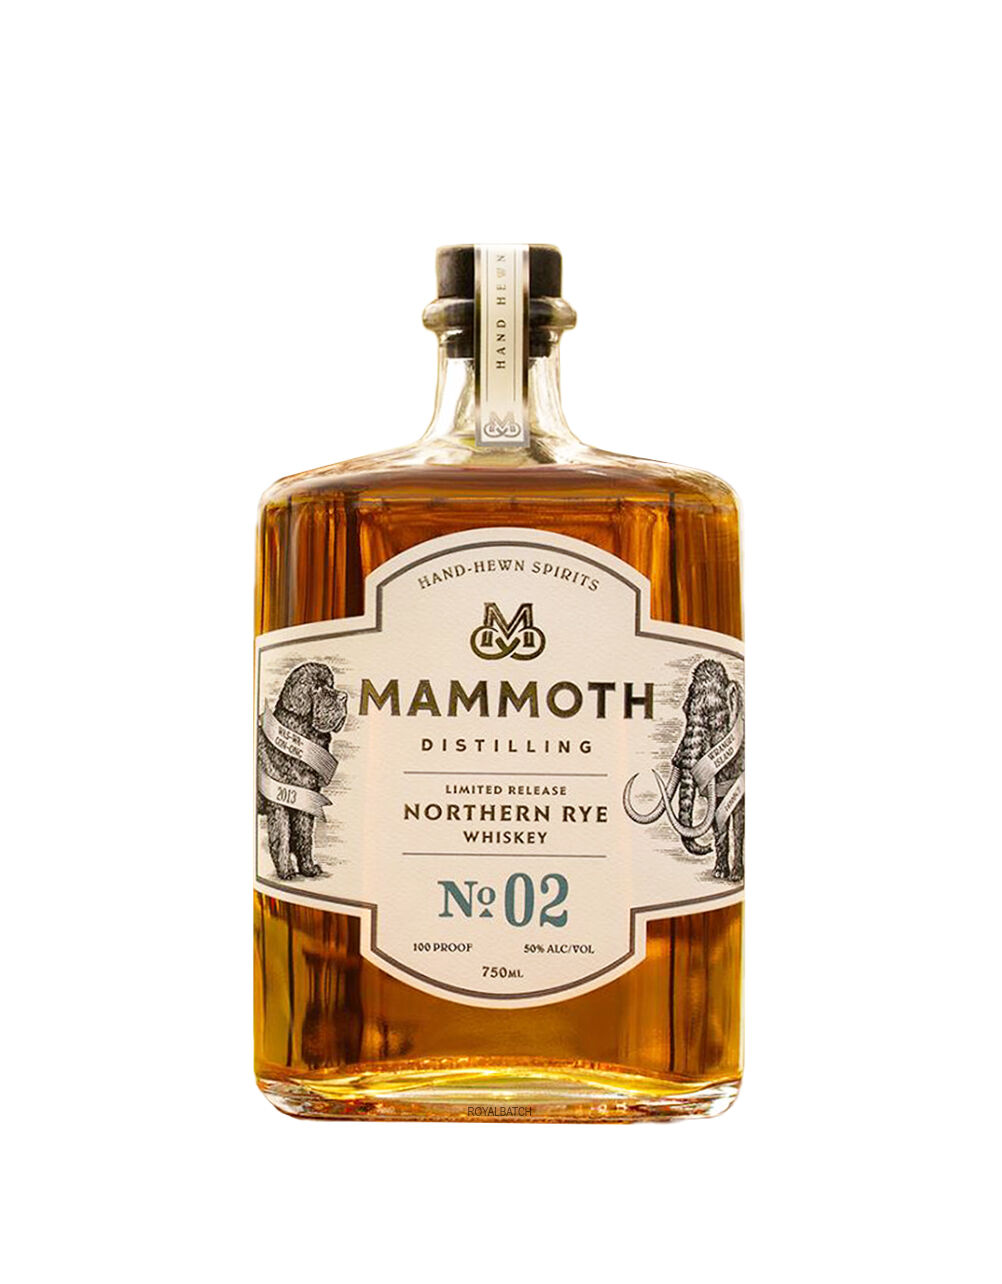 Mammoth Distilling Limited Release Northern Rye No. 02 Whiskey